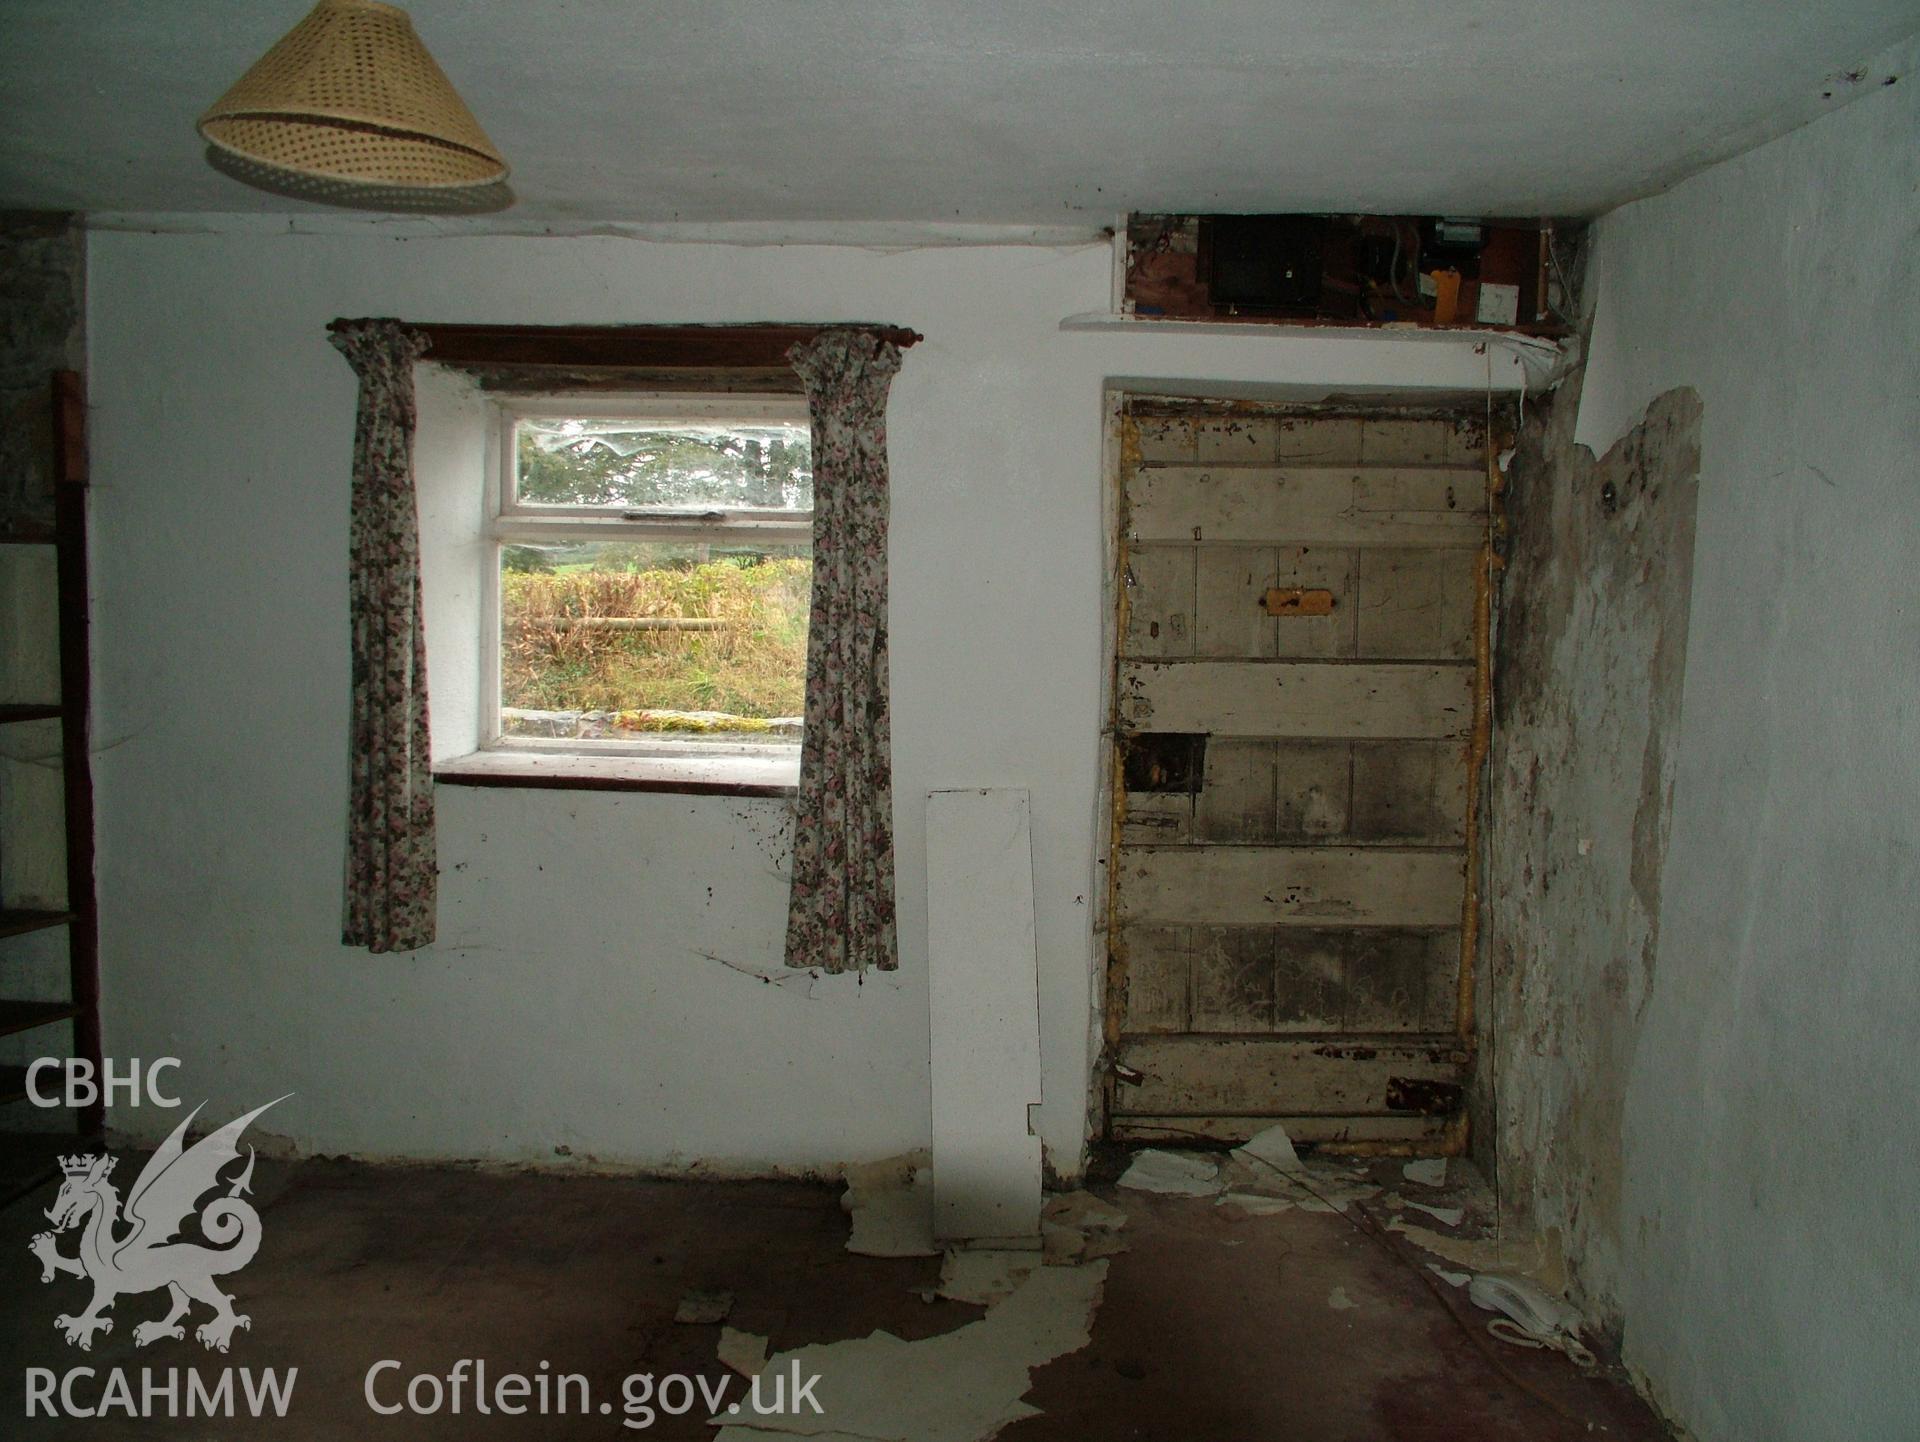 Digital colour photograph showing Llwynypandy chapel house - interior, view of window and door